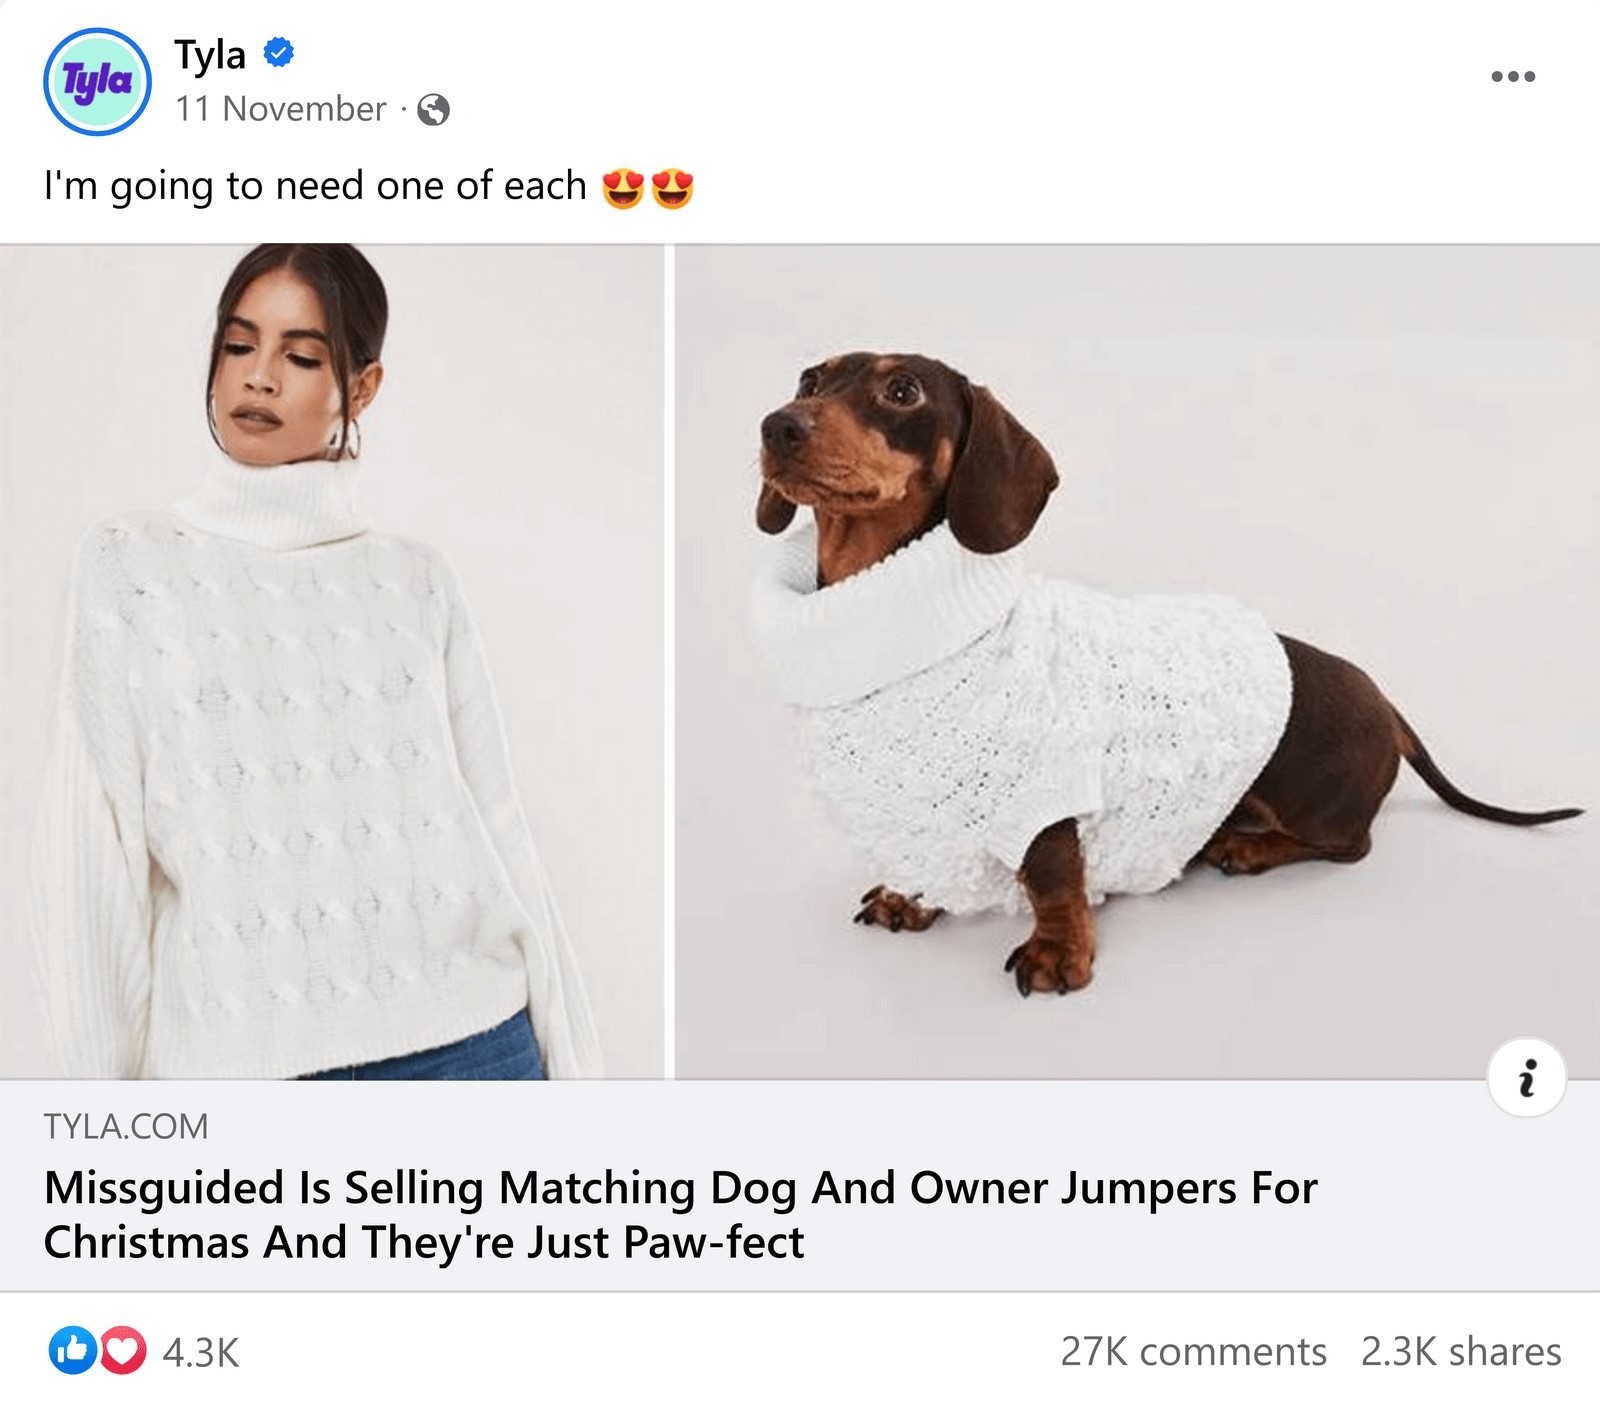 an article about Missguided selling marching dog and owner jumpers for Christmas posted by "Tyla"